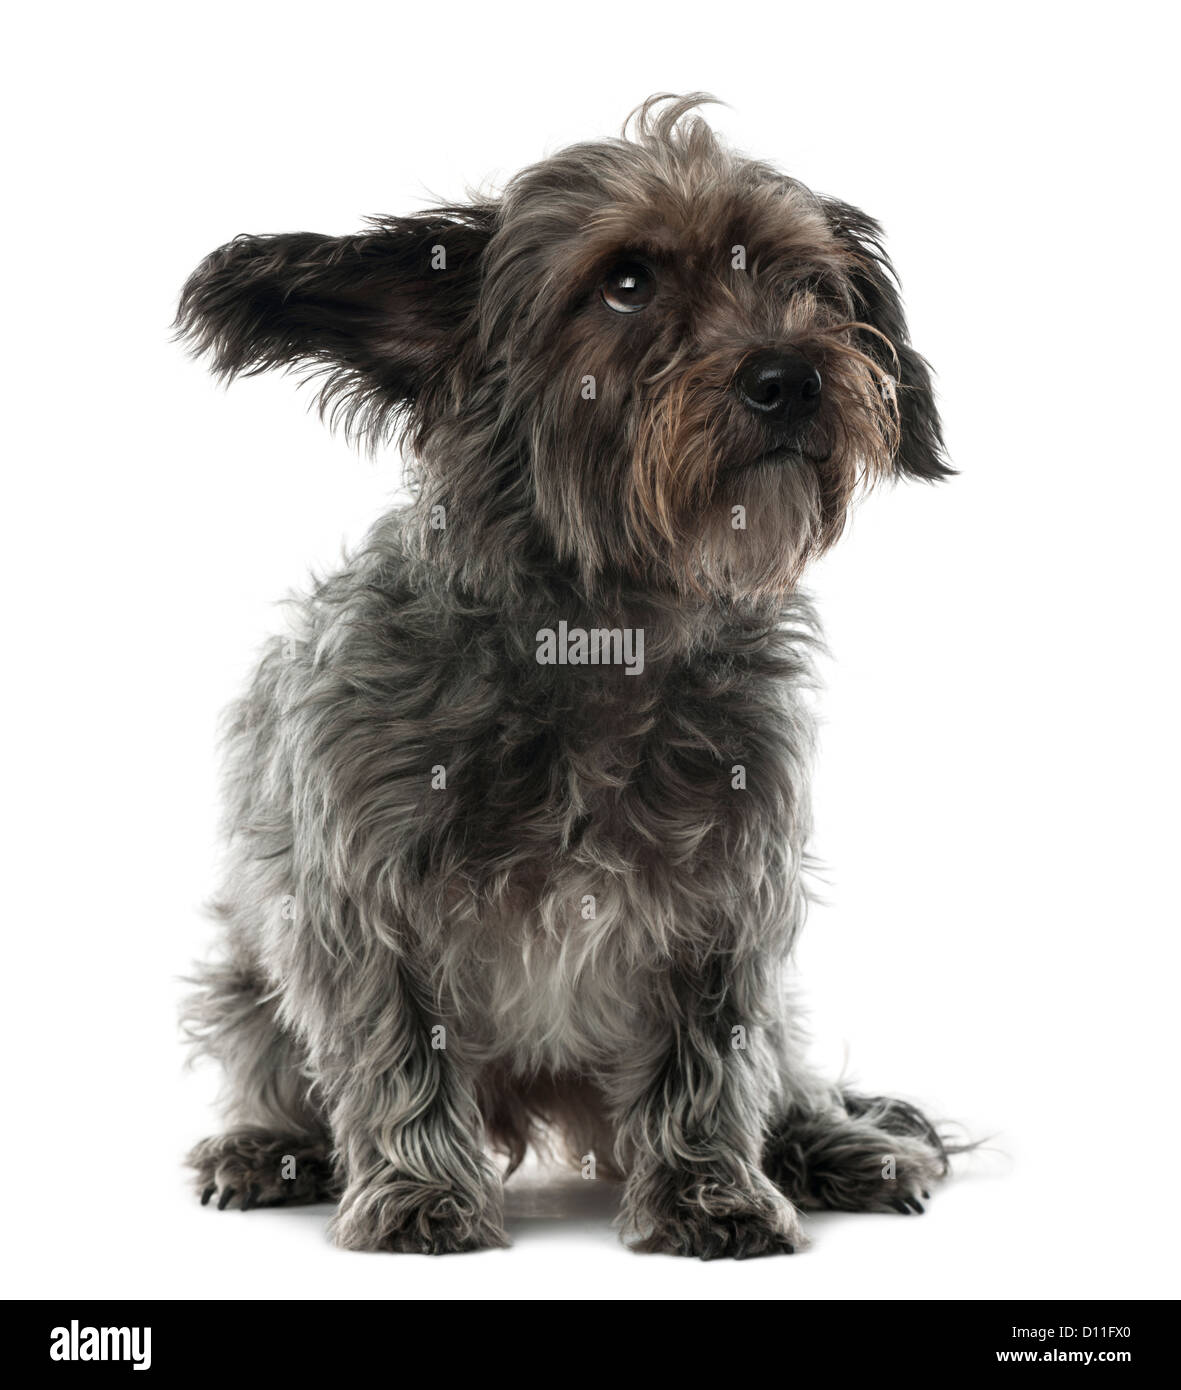 Mixed-breed dog, 3 years old, sitting and looking away against white background Stock Photo